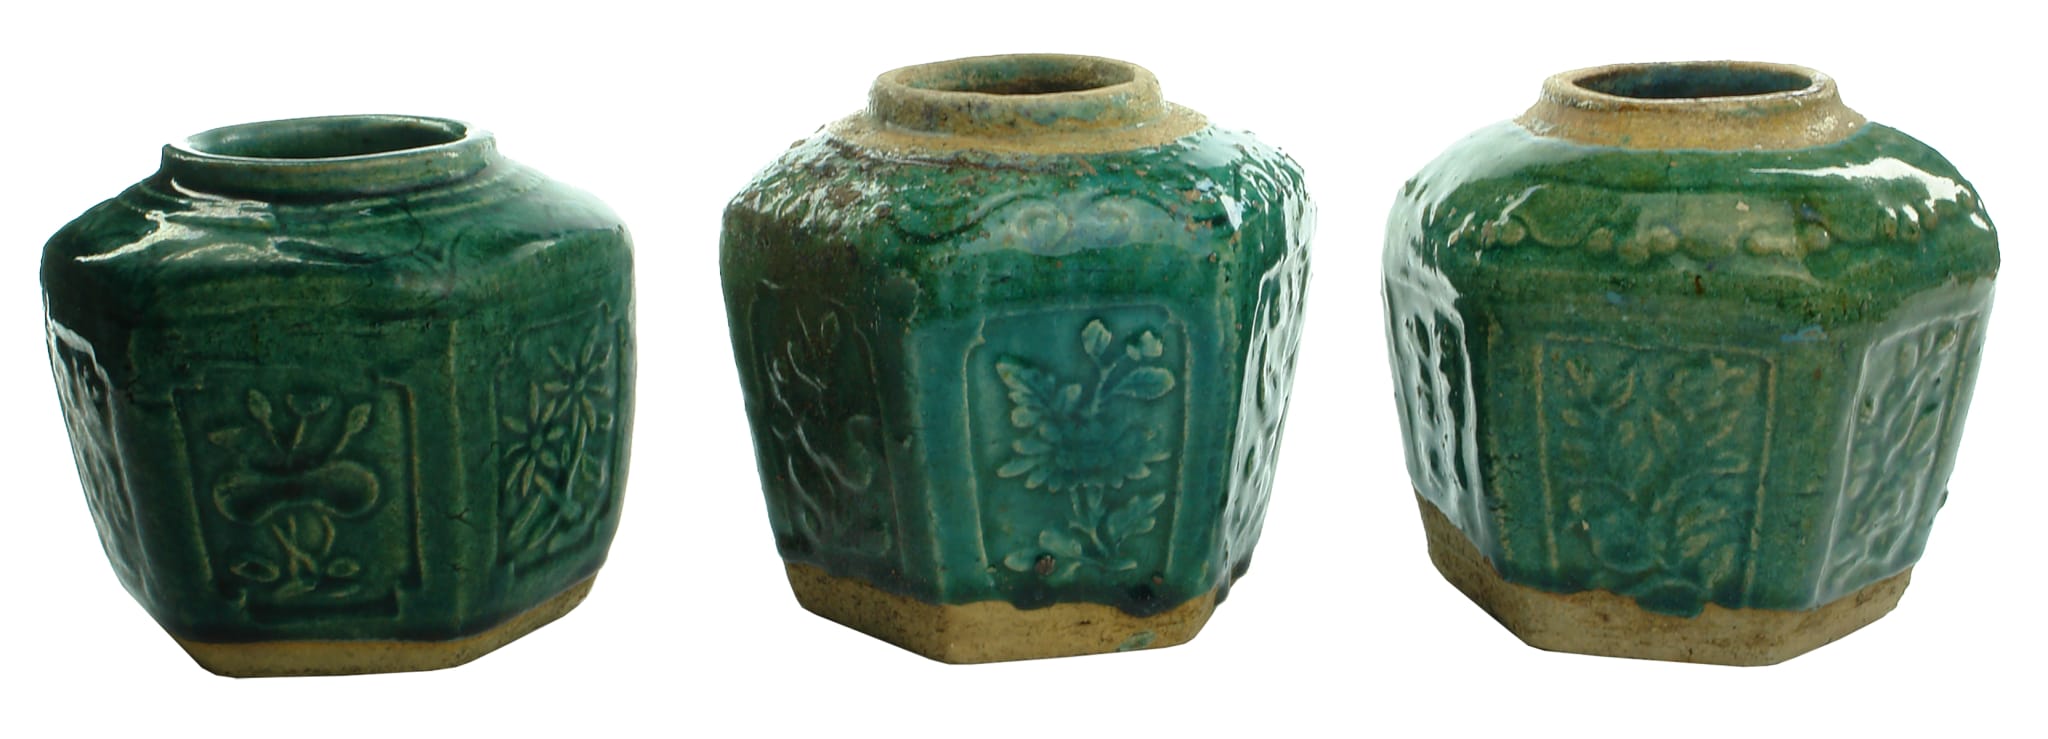 Antique Chinese Pottery Jars